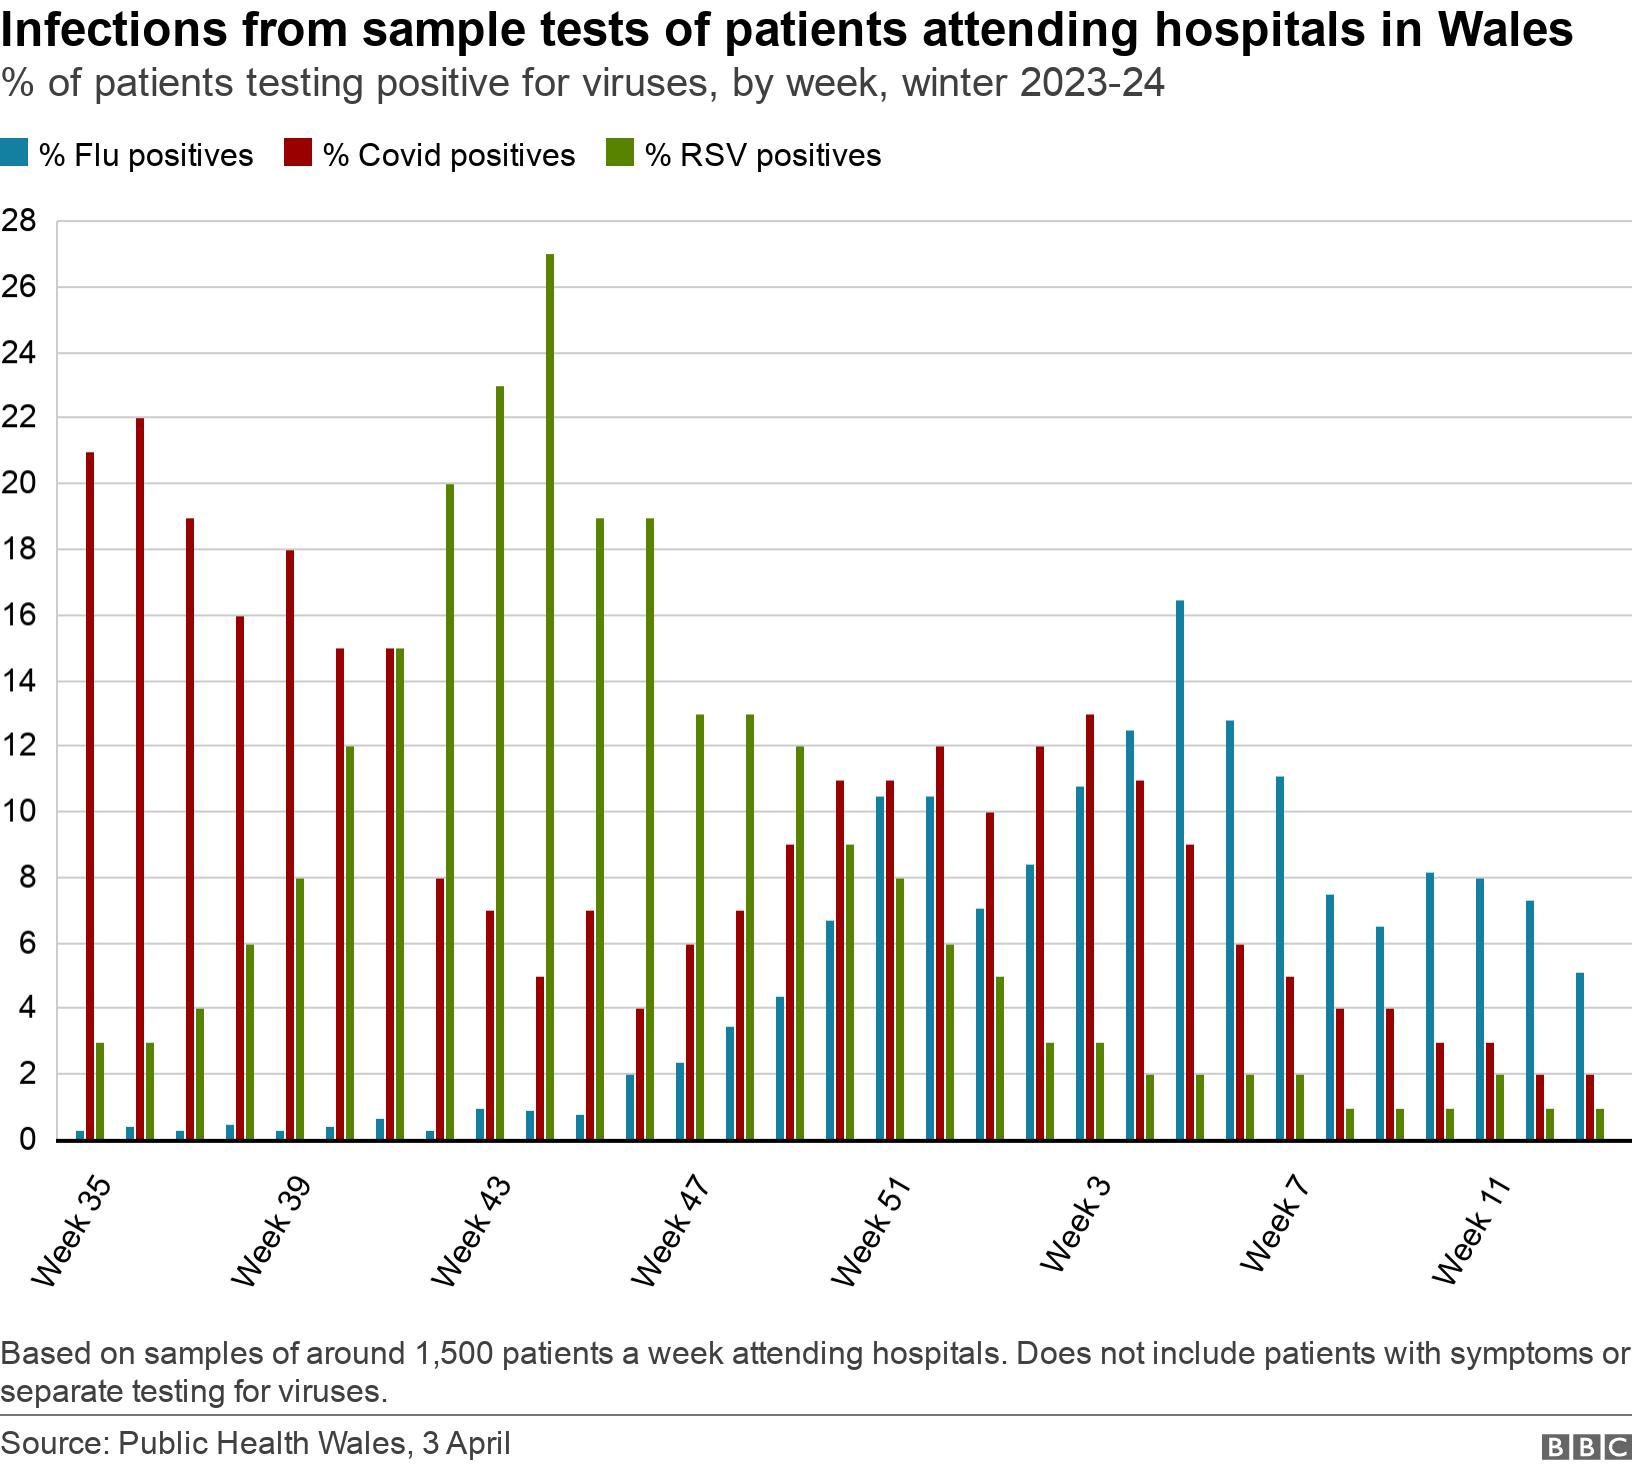 Infections from sample tests of patients attending hospitals in Wales. % of patients testing positive for viruses, by week, winter 2023-24.  Based on samples of around 1,500 patients a week attending hospitals. Does not include patients with symptoms or separate testing for viruses..